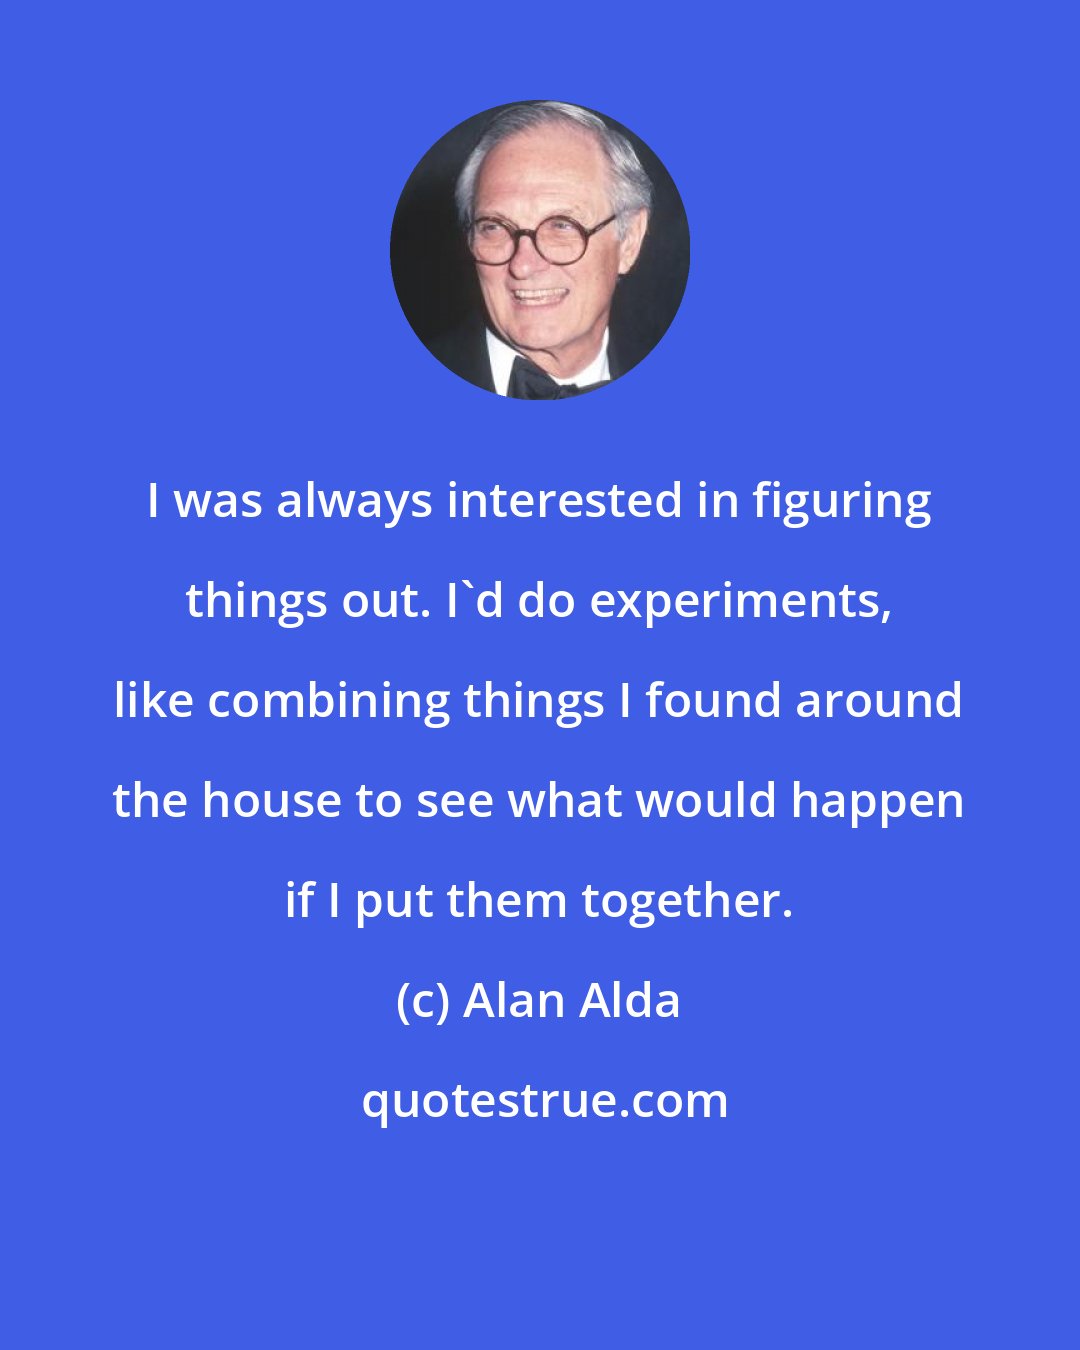 Alan Alda: I was always interested in figuring things out. I'd do experiments, like combining things I found around the house to see what would happen if I put them together.